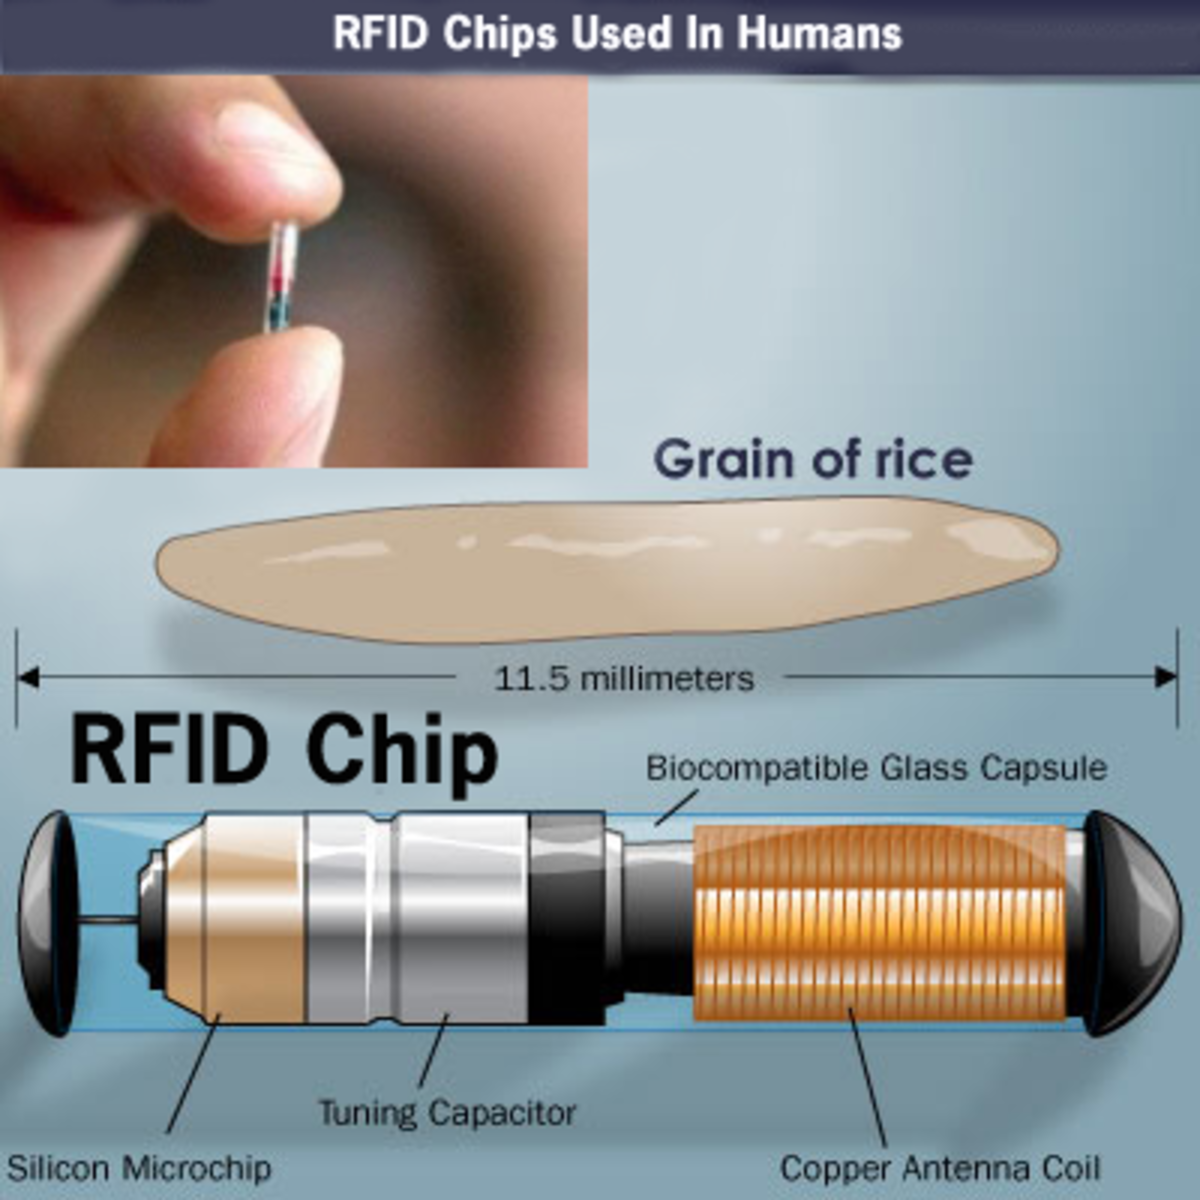 Just the size of a grain of rice RFID tracking is proving popular amoungst people and animals